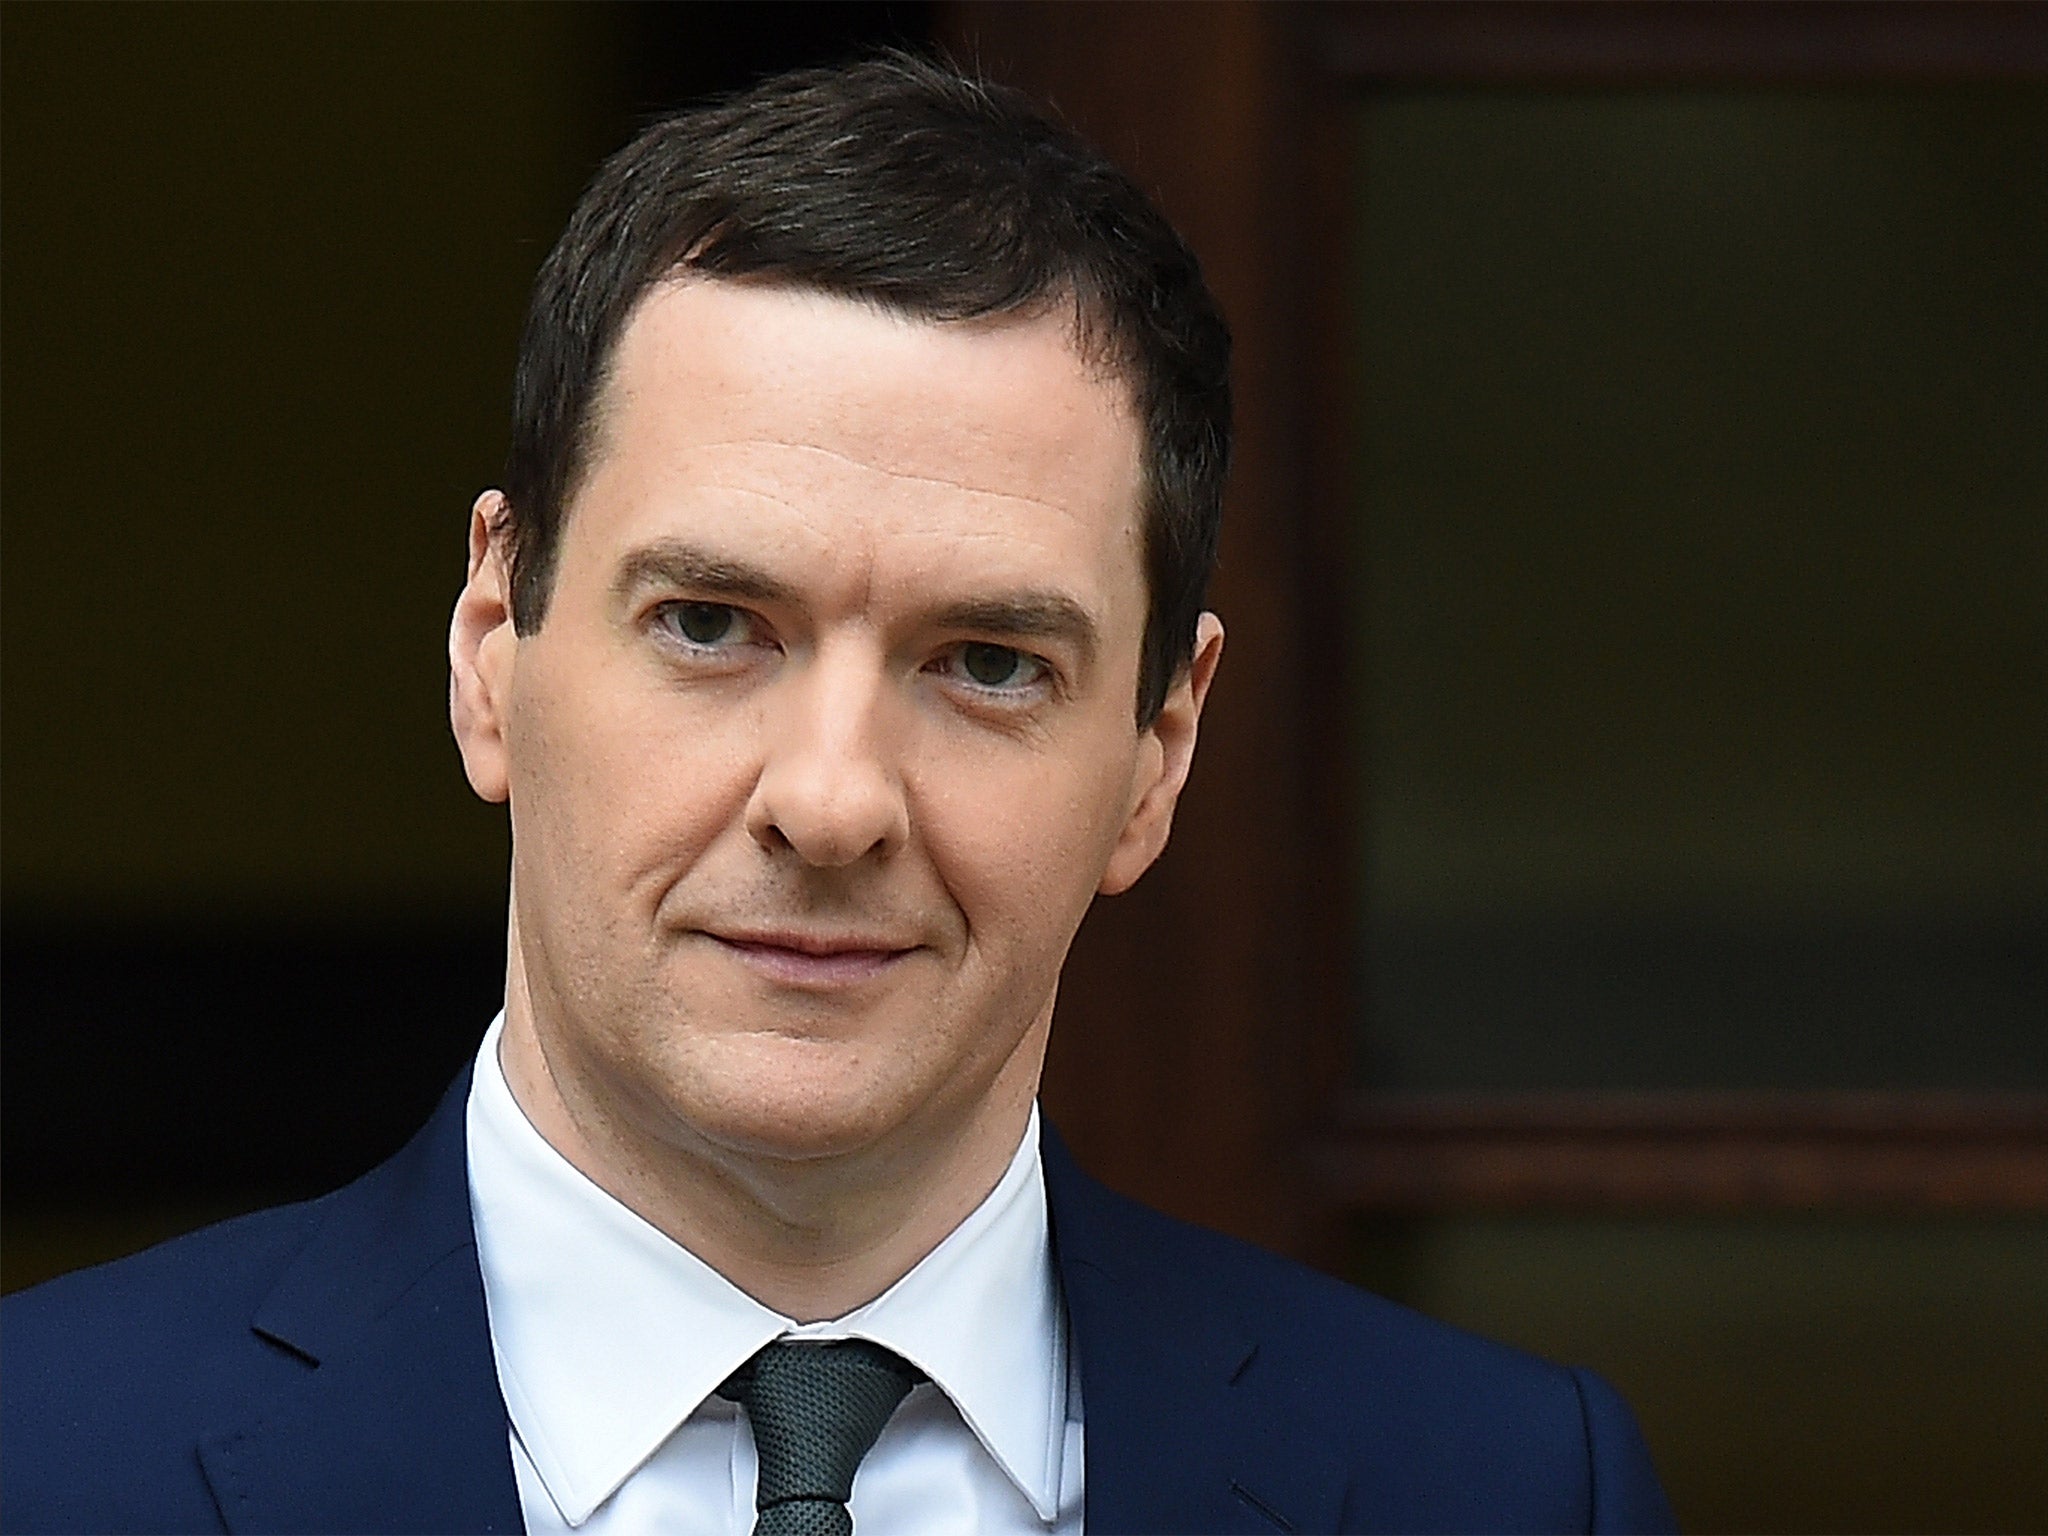 There are a host of effective net tax increases in the Chancellor's latest package